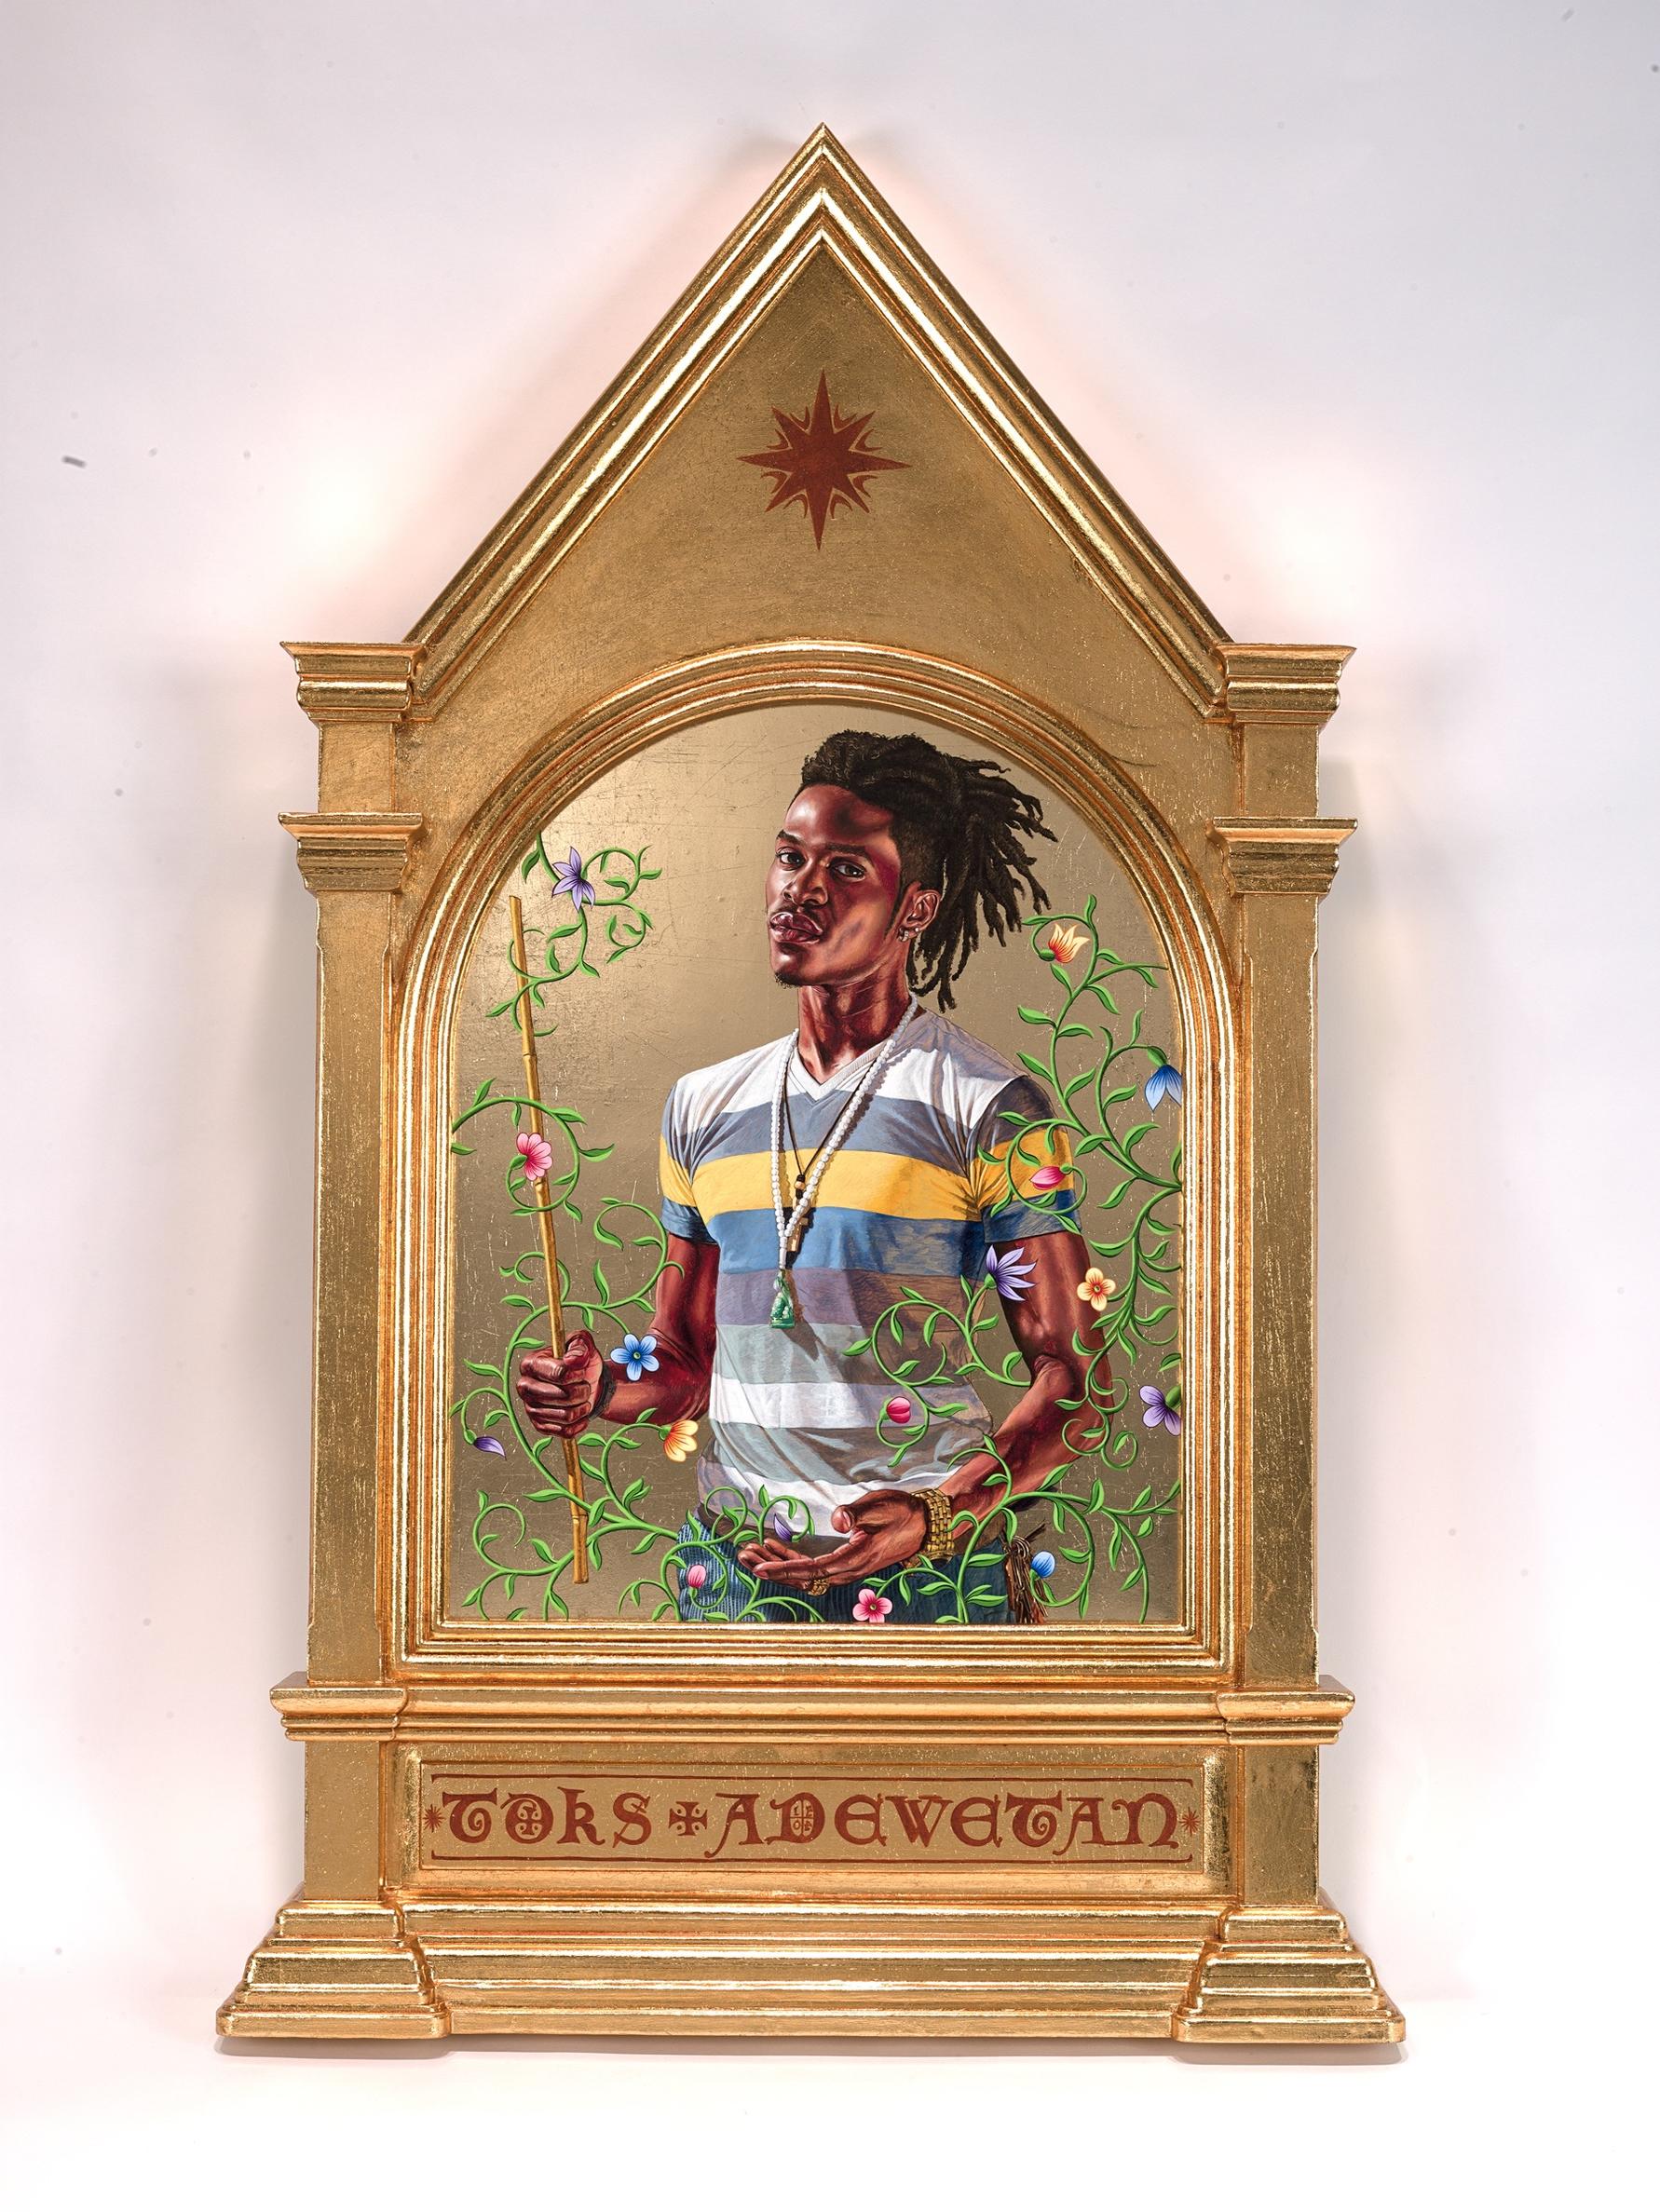 This oil and 22 karat gold leaf painting on wood panel measures approximately 40 x 24 inches. At the center is an image of a Black young man’s torso and head painted in vivid colors against a plain shiny gold background. This man has a muscular and toned body and he stands facing the viewer, turned slightly toward our left. He has deep reddish brown skin and his dark dreadlocks flow behind him. He looks confidently at the viewer with a direct gaze. He is dressed in a short-sleeved t-shirt that has white, gr